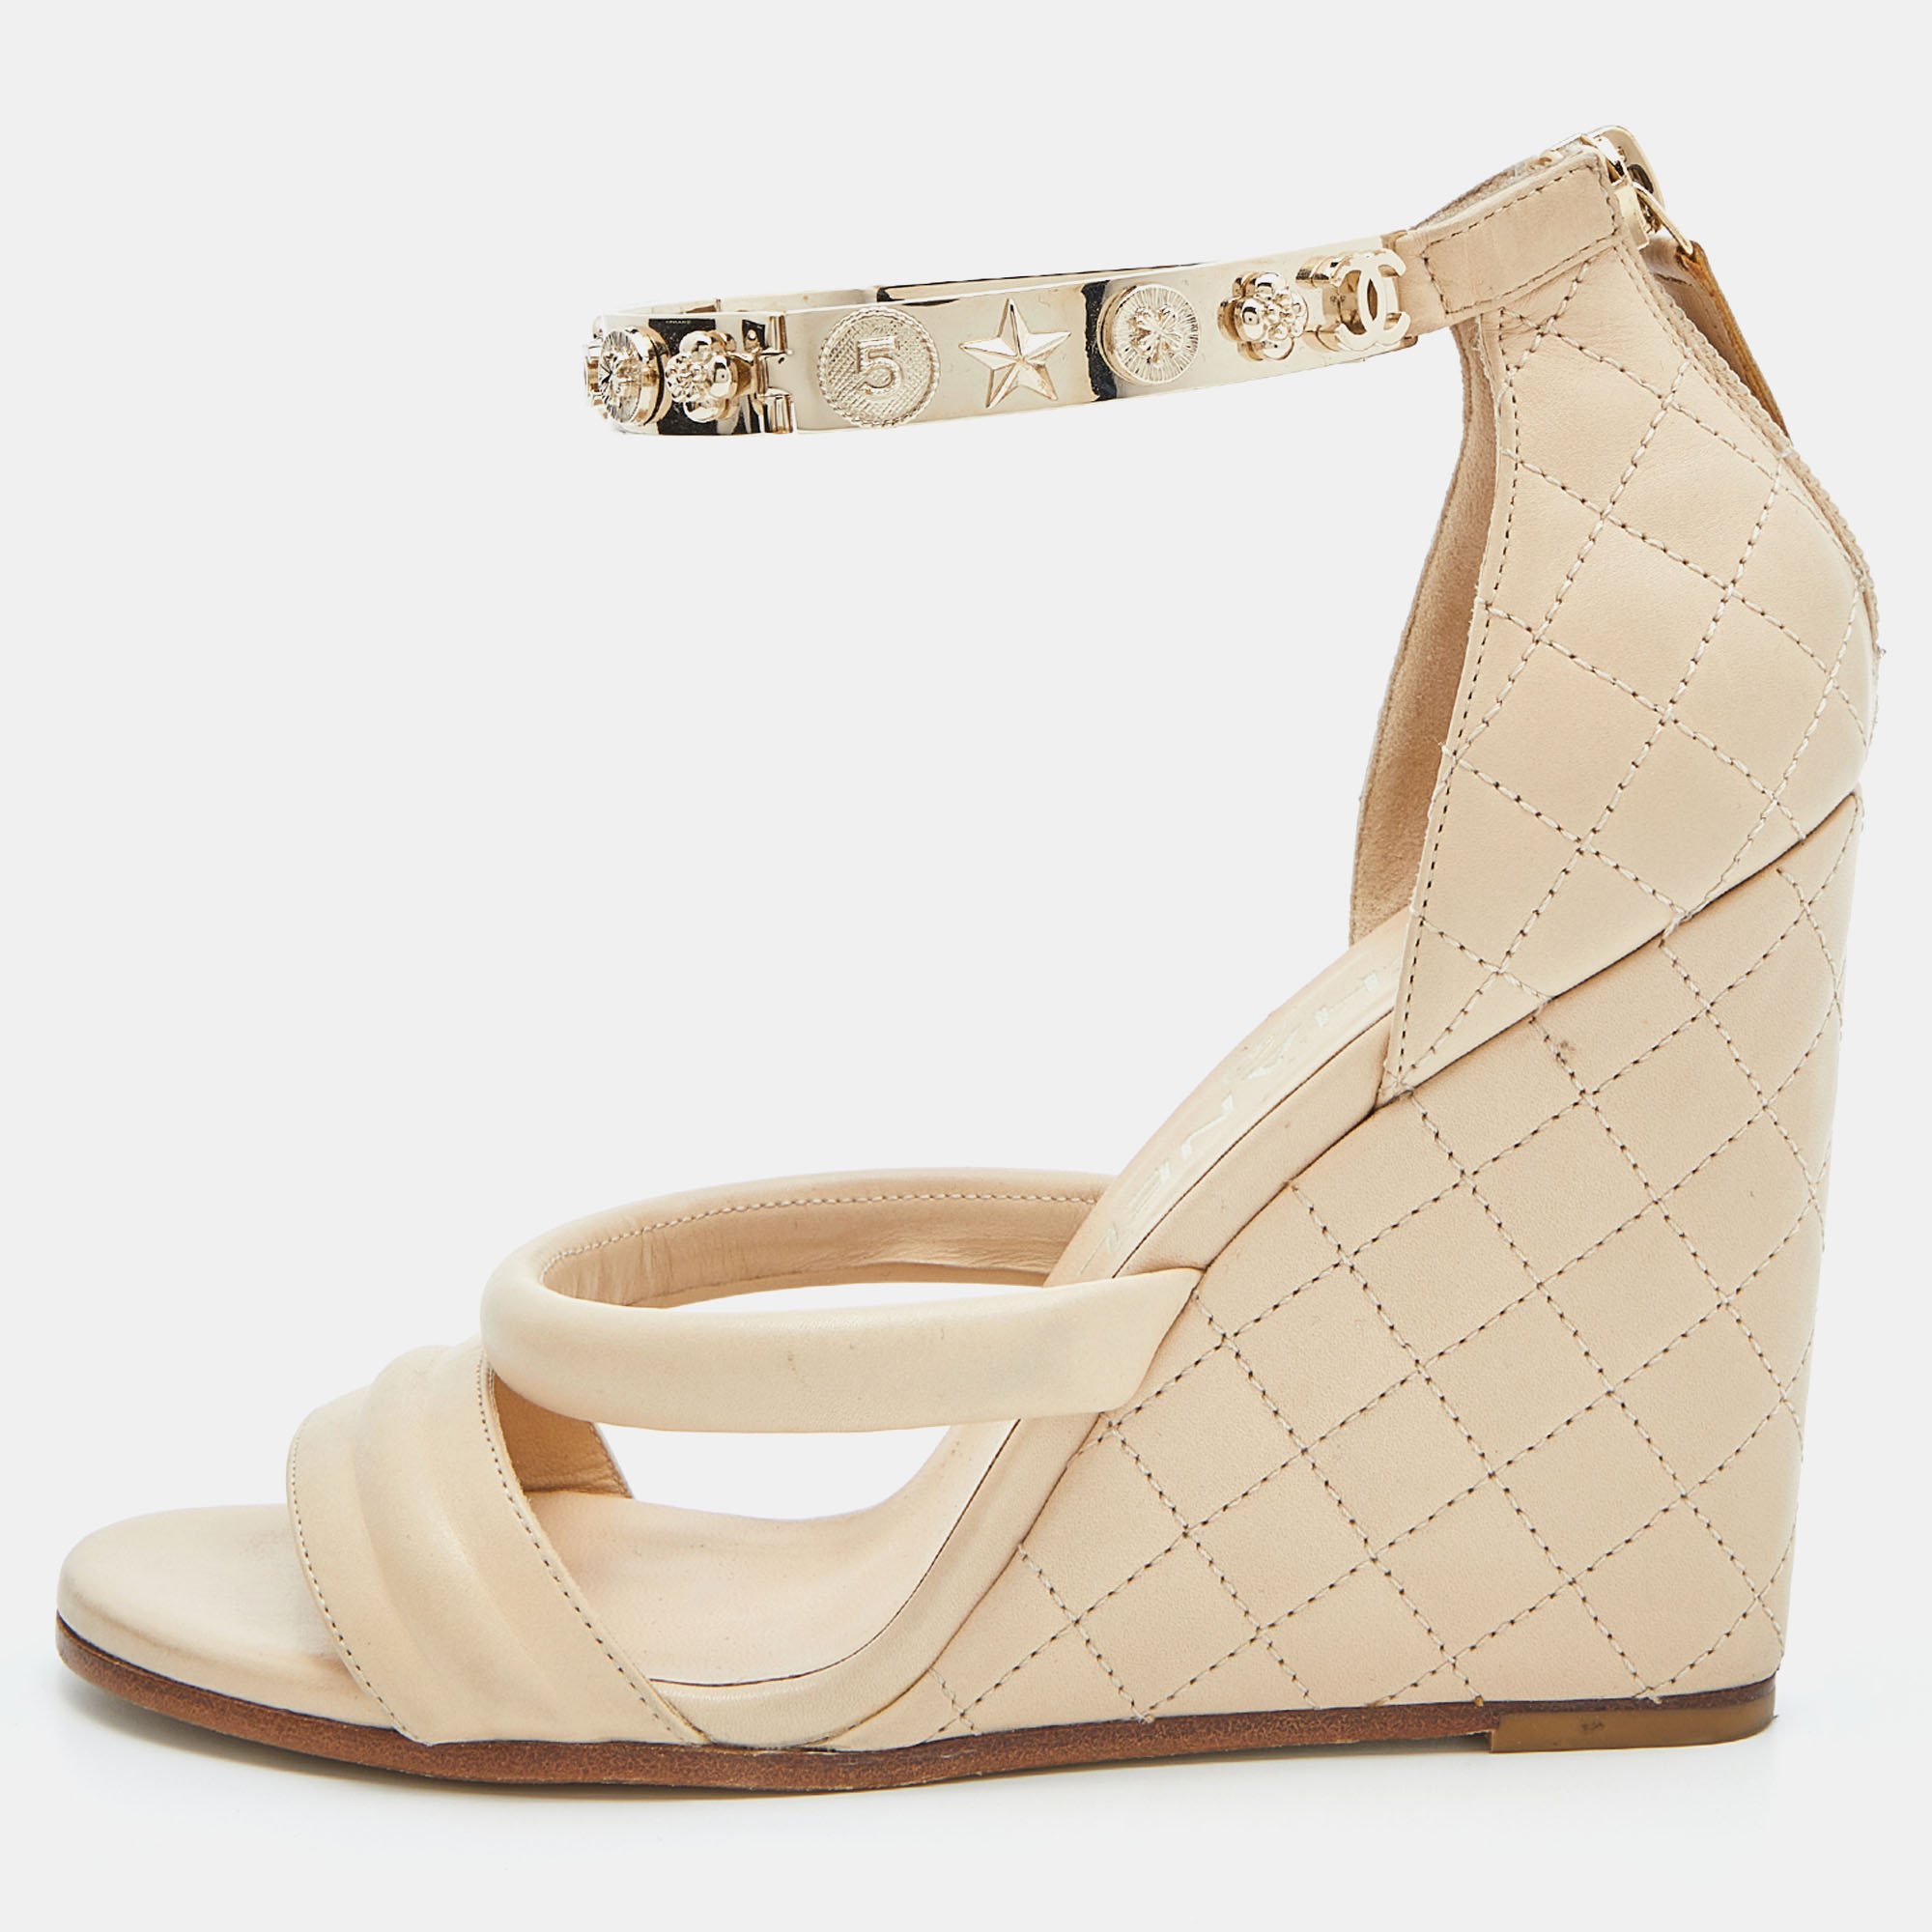 Chanel Beige Quilted Leather Charm Embellished Ankle Cuff Wedge Sandals  Size 40.5 Chanel